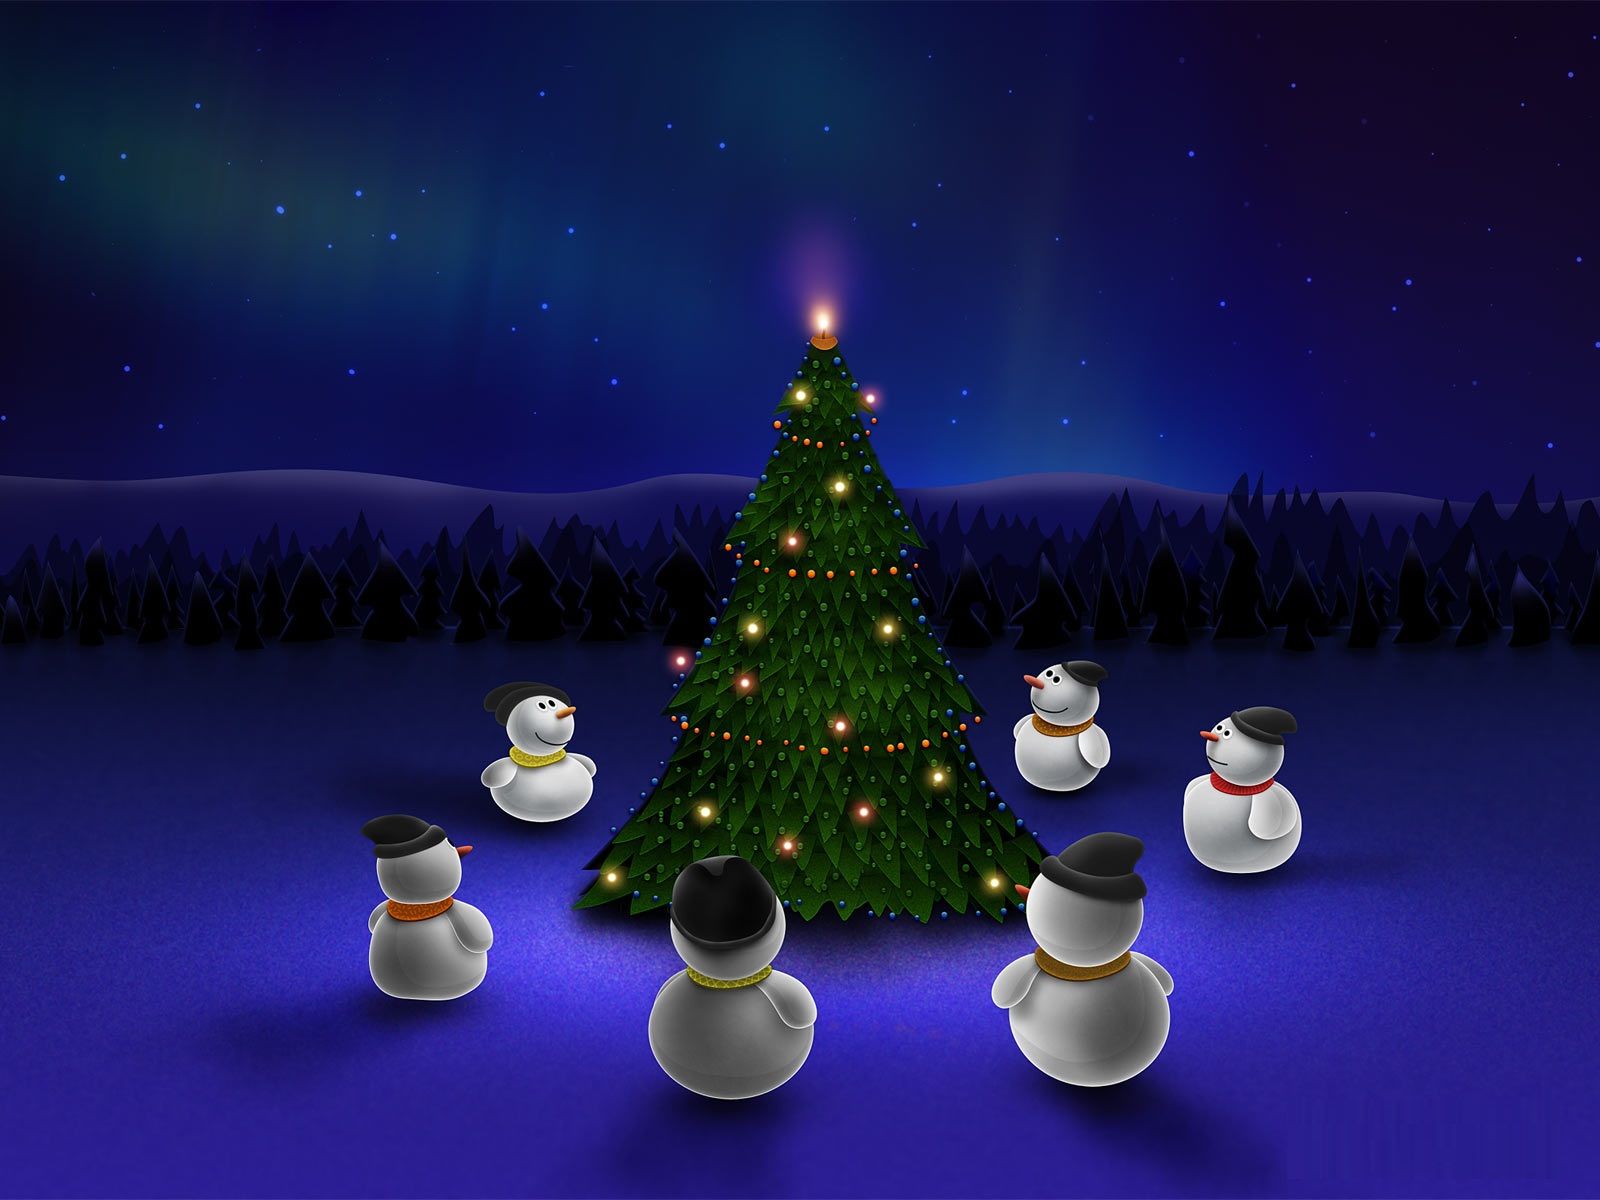 Christmas-Live-Wallpapers-Download-Free-Christmas-Desktop-Live-Background-Full-HD-Wallpapers.jpg